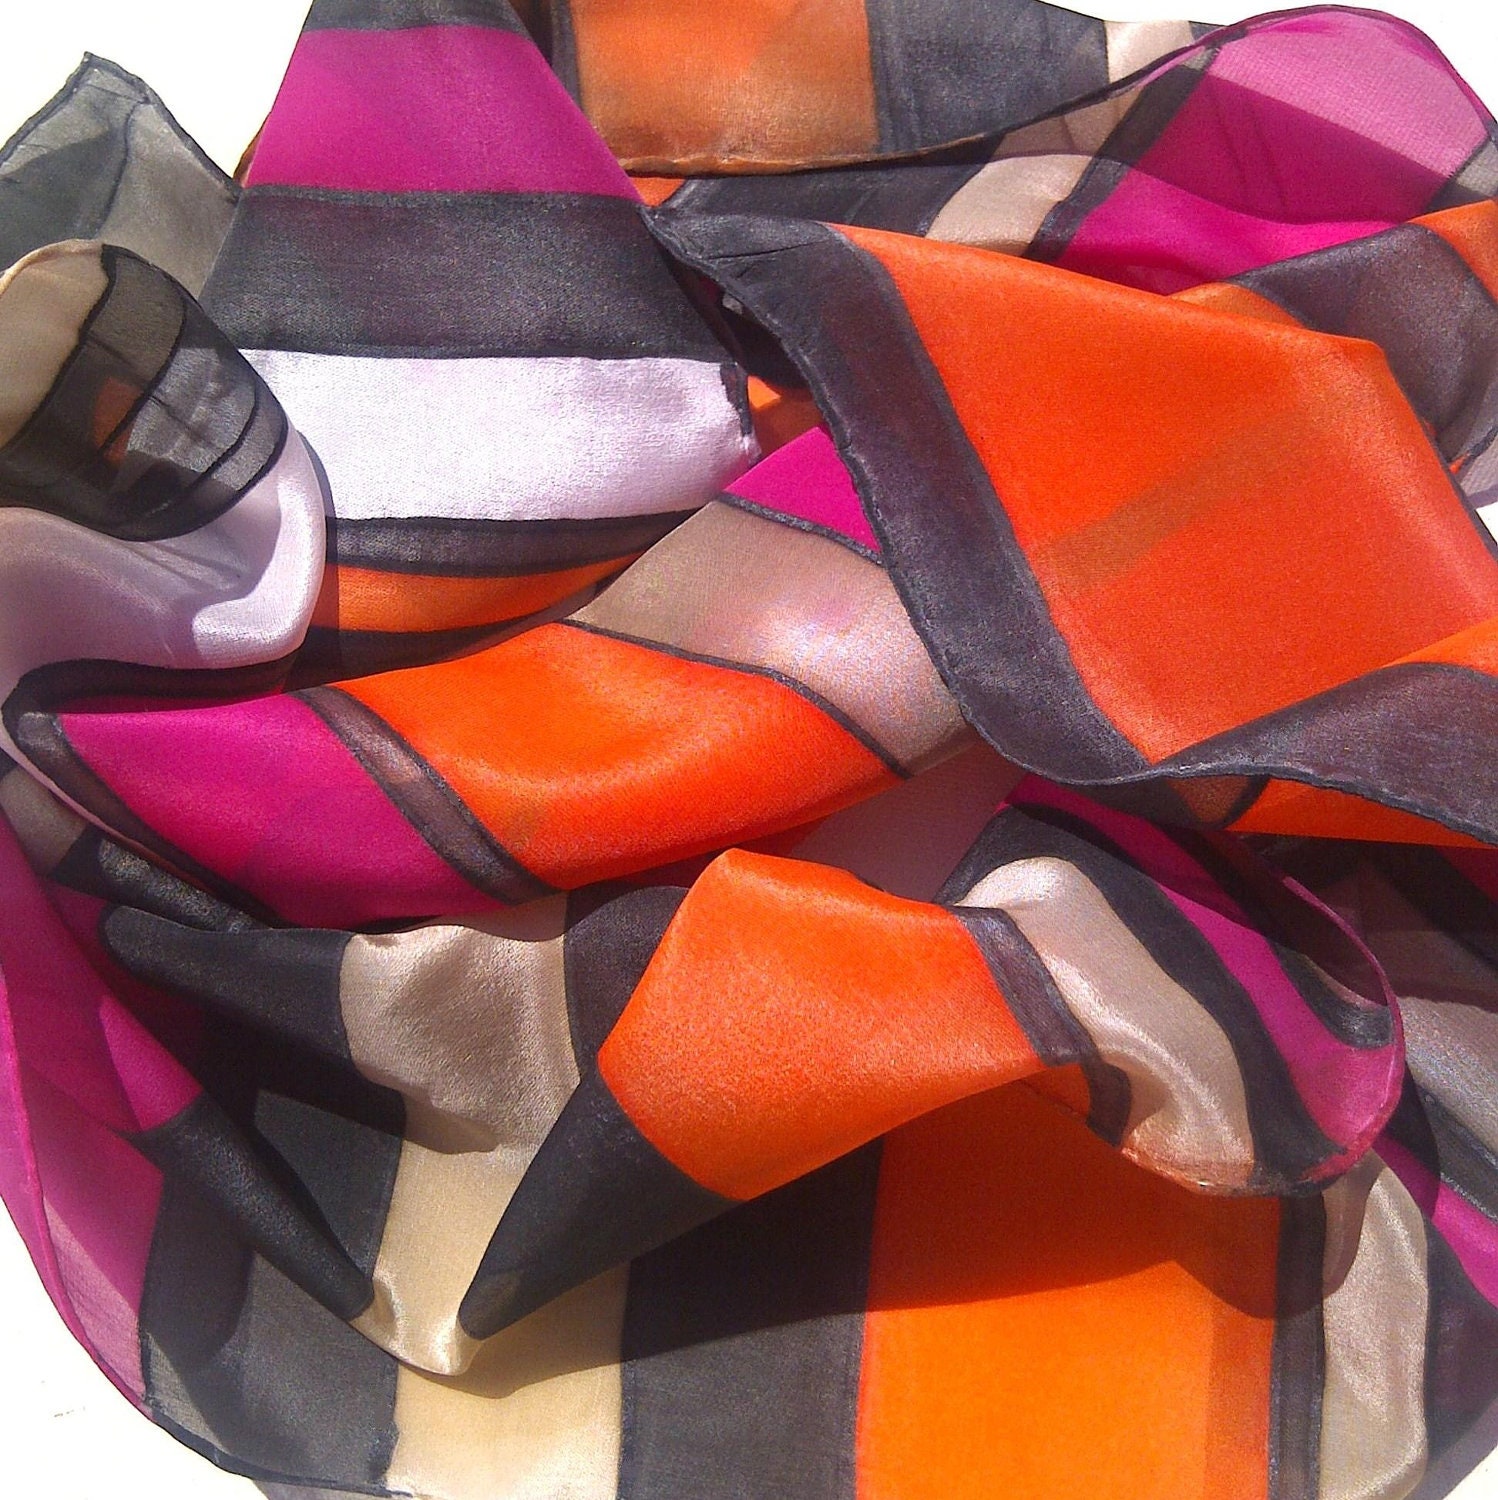 10% OFF! Hot Pink and Orange Handpainted Silk Scarf with Stripes MARMELADE Free Priority - SunandSilk